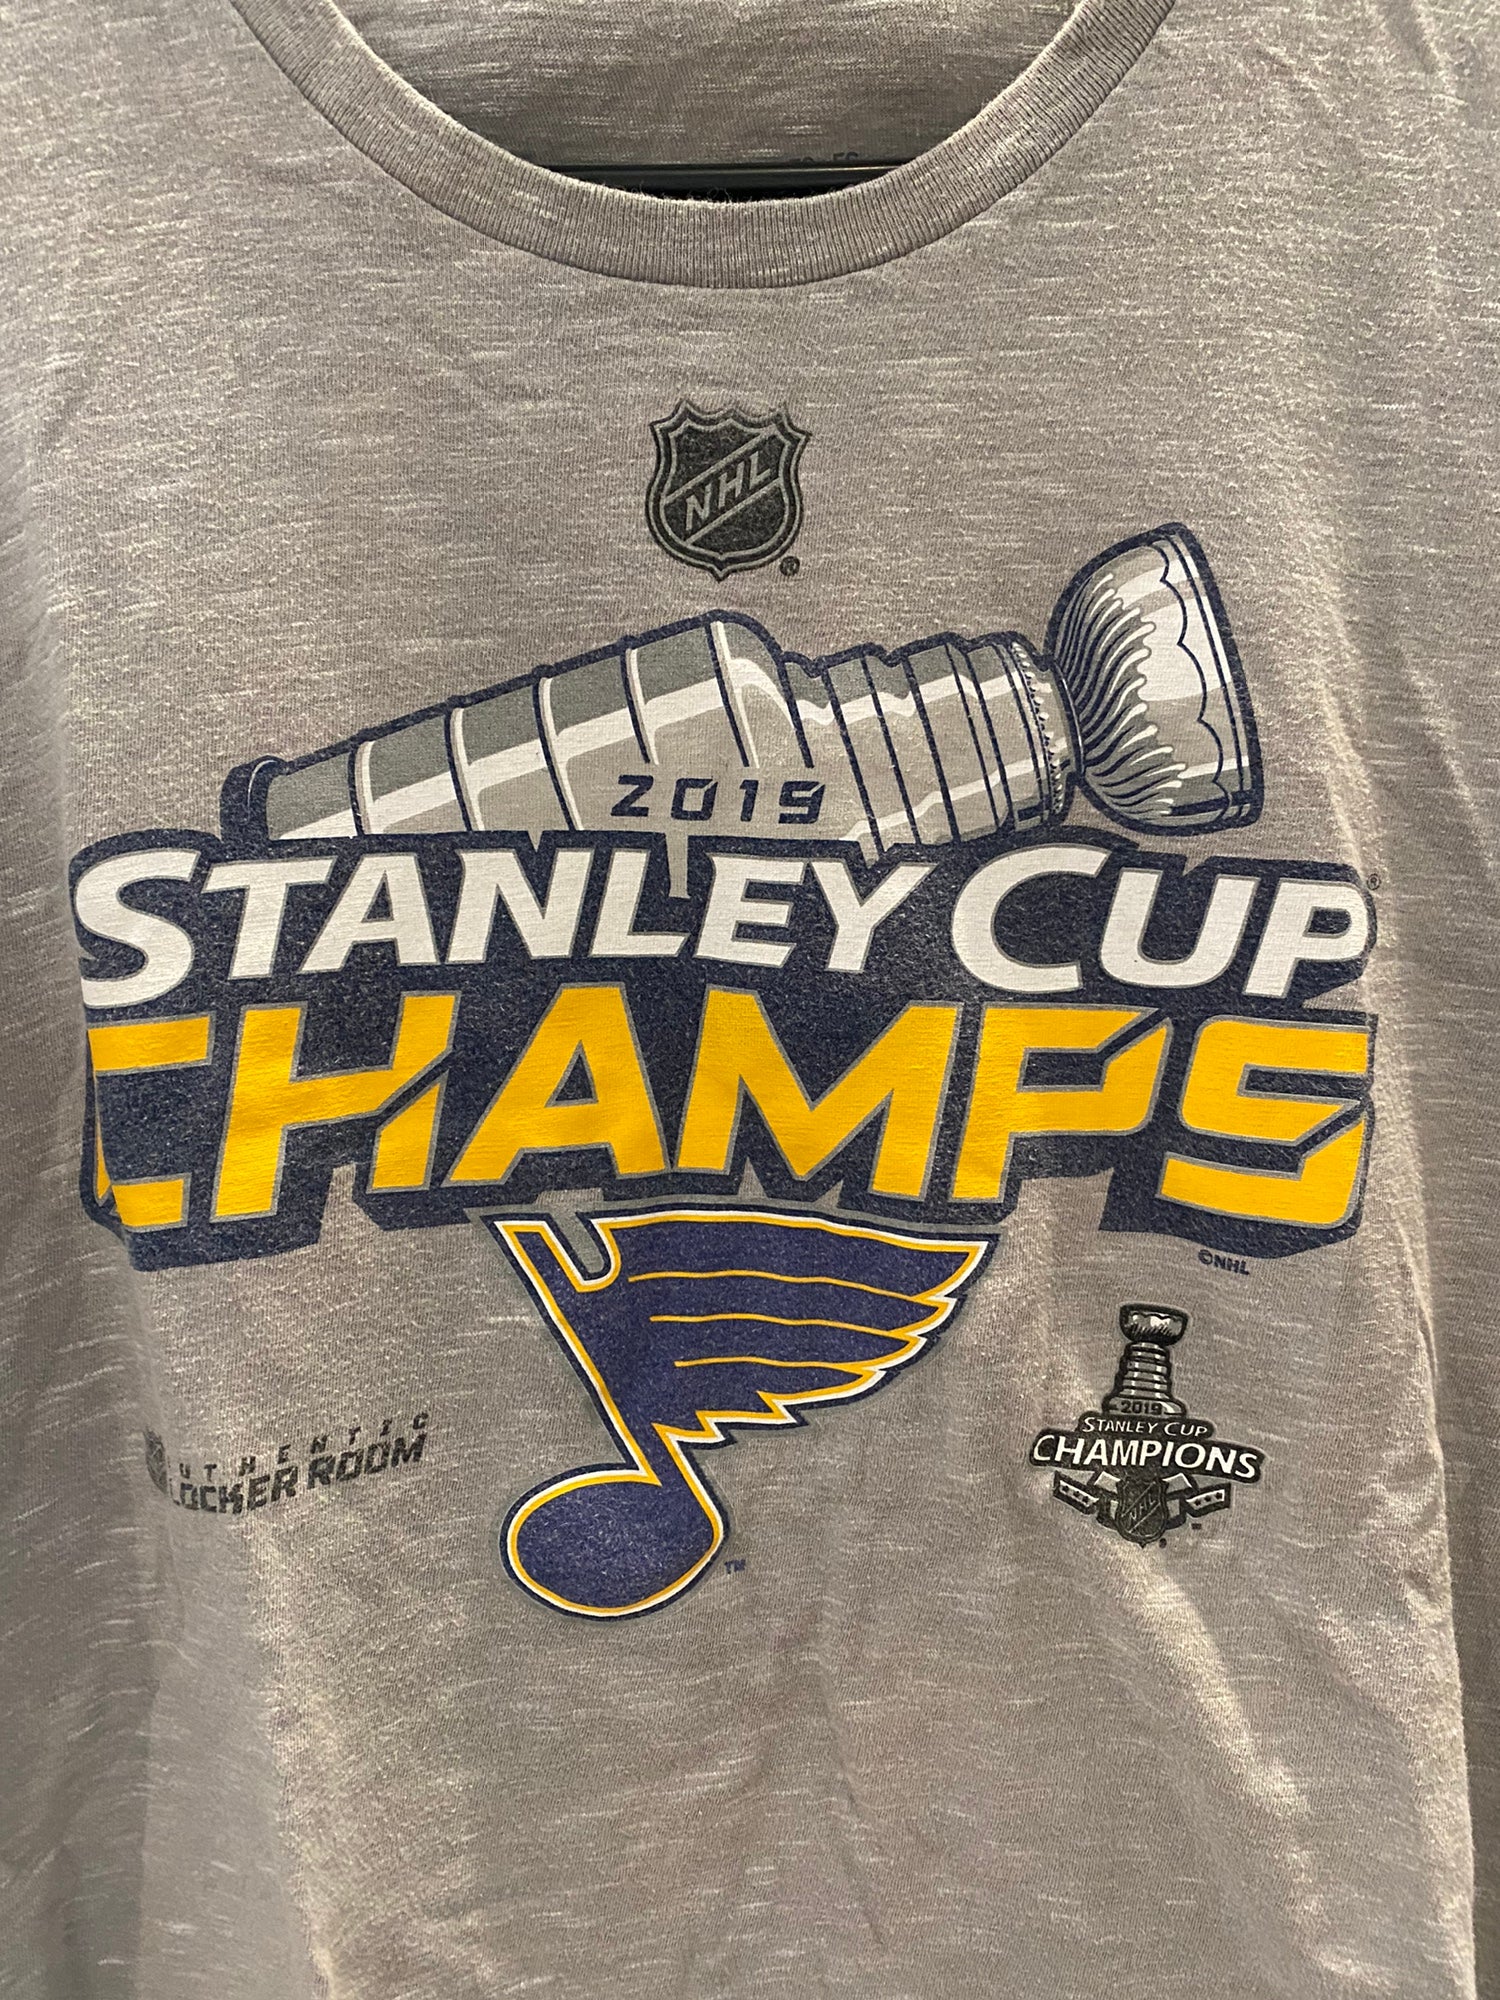 Stanley Cup Champions St Louis Blues 2019 t-shirt by To-Tee Clothing - Issuu